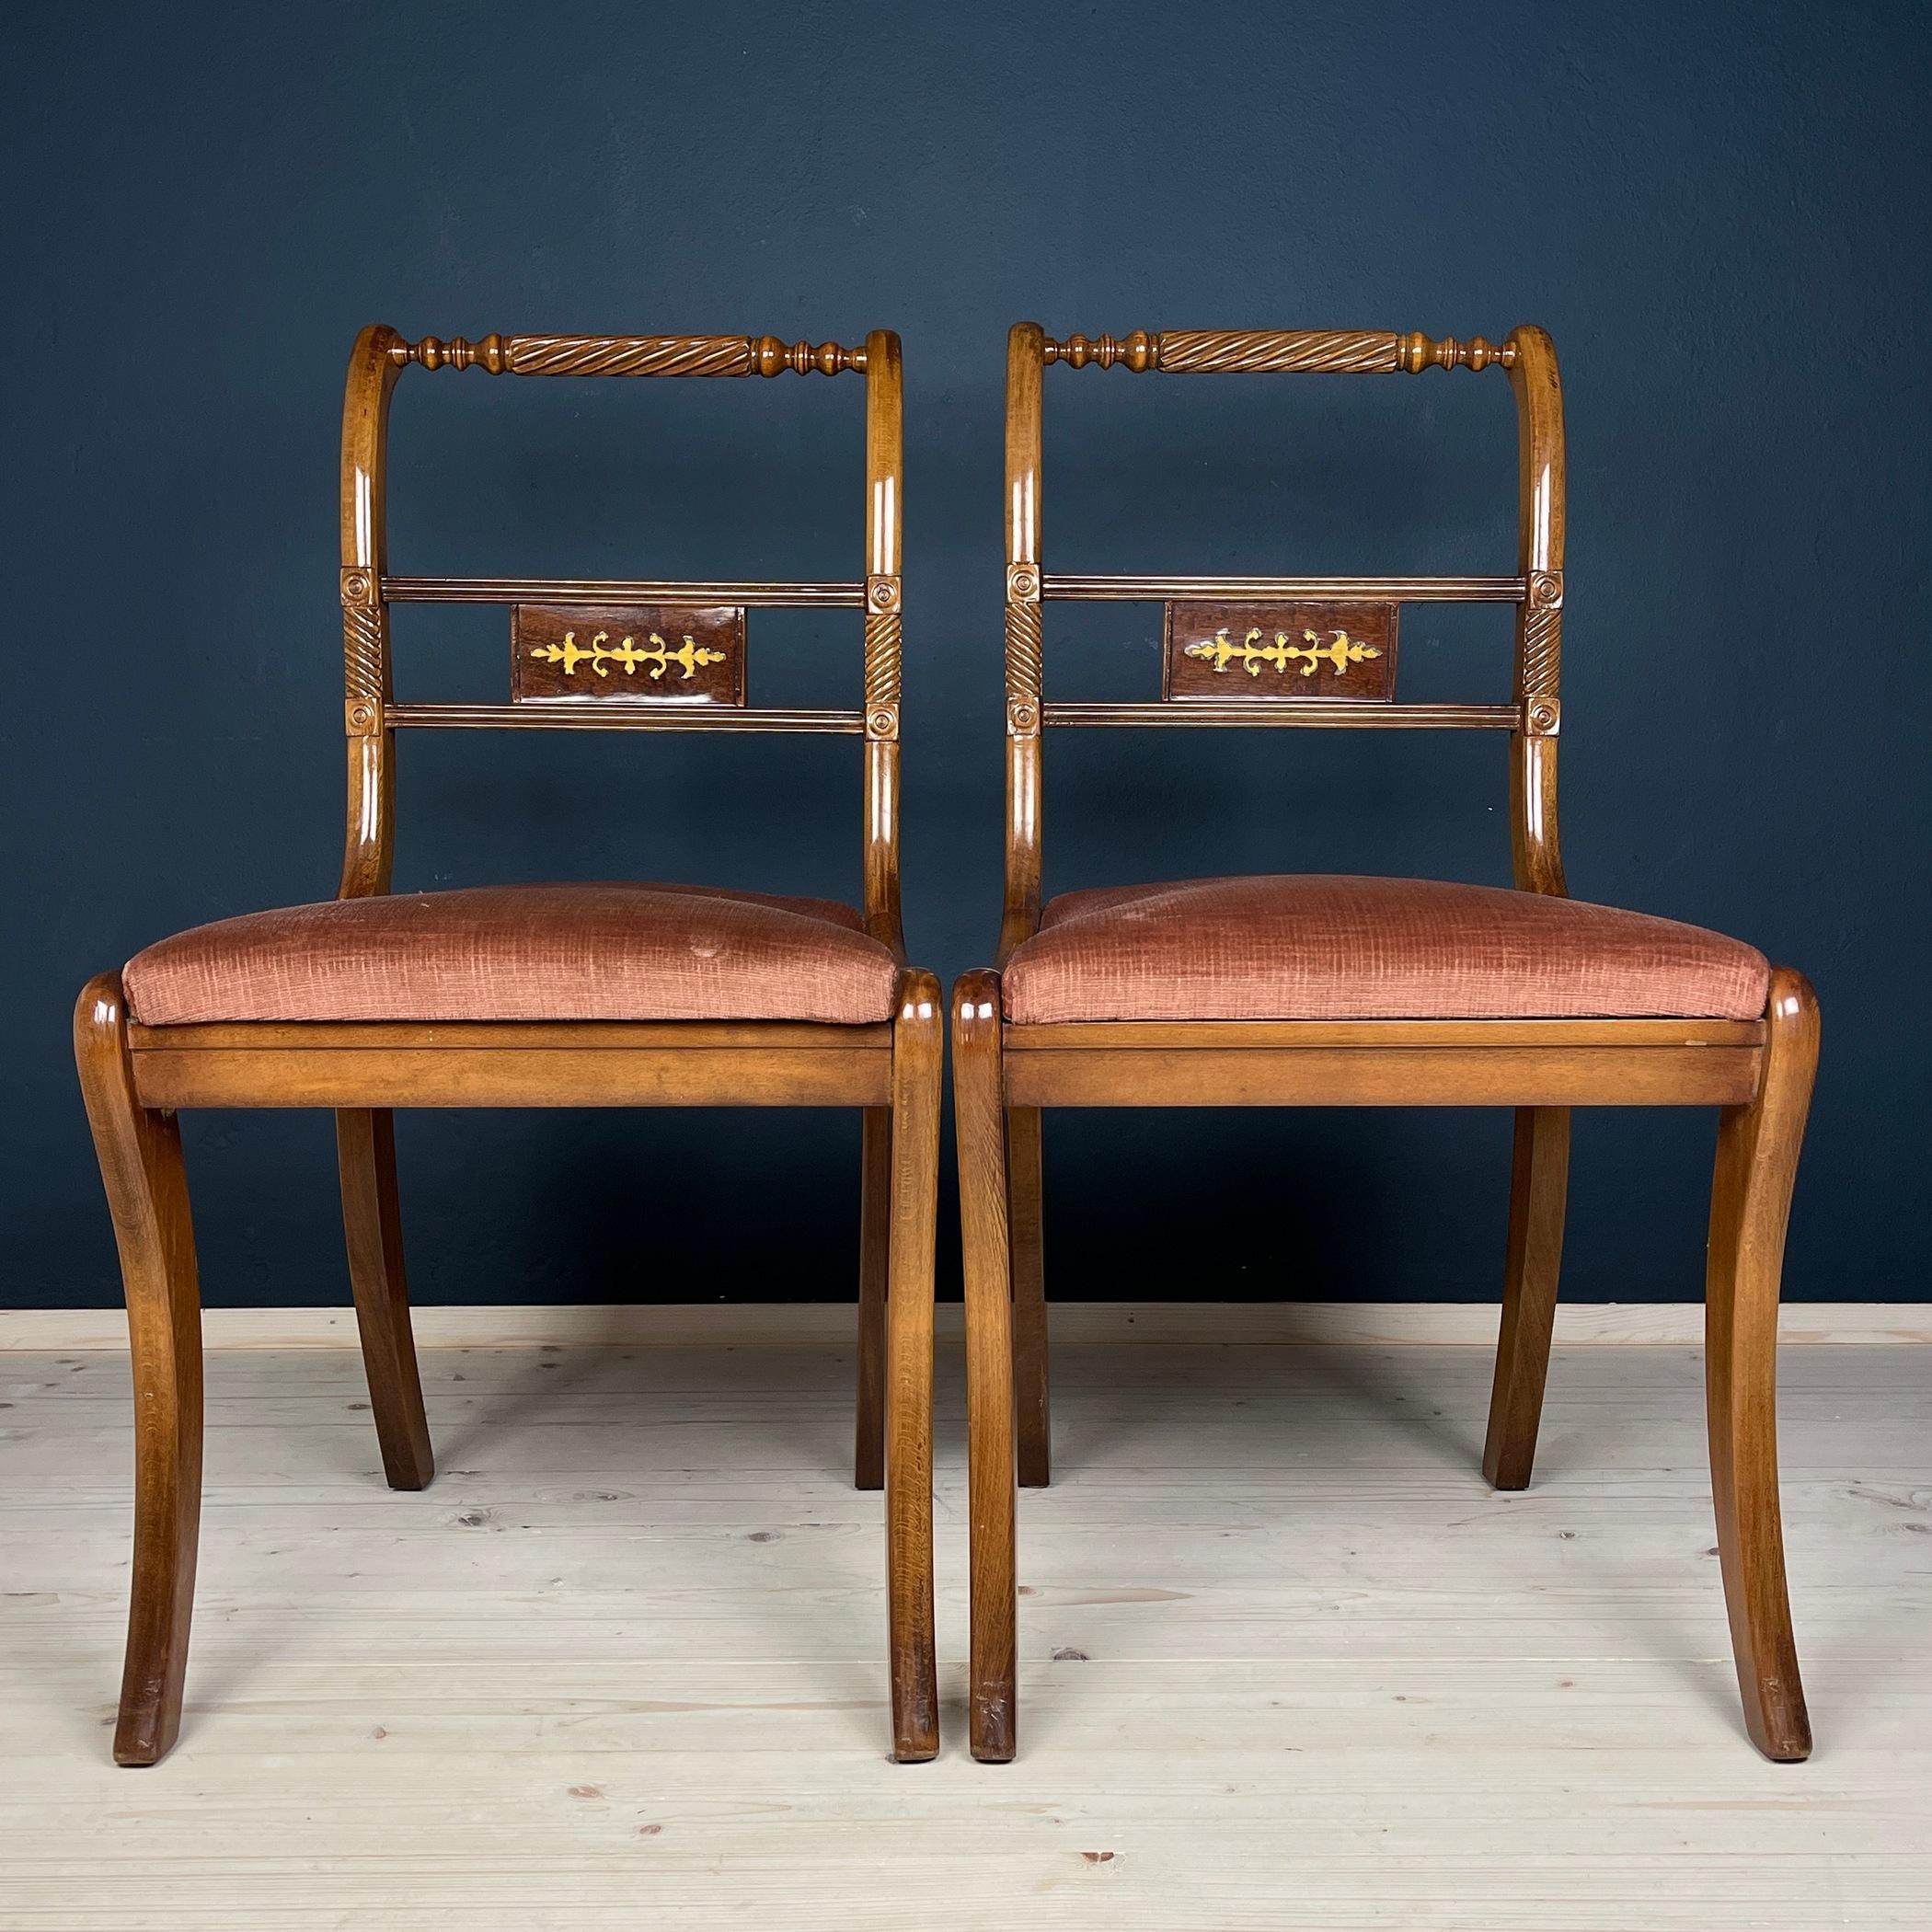 Introducing this charming pair of chairs, crafted in Italy during the 1960s. Despite the passage of time, these chairs have been impeccably preserved, showcasing their enduring beauty and quality craftsmanship. The original fabric. Adorned with